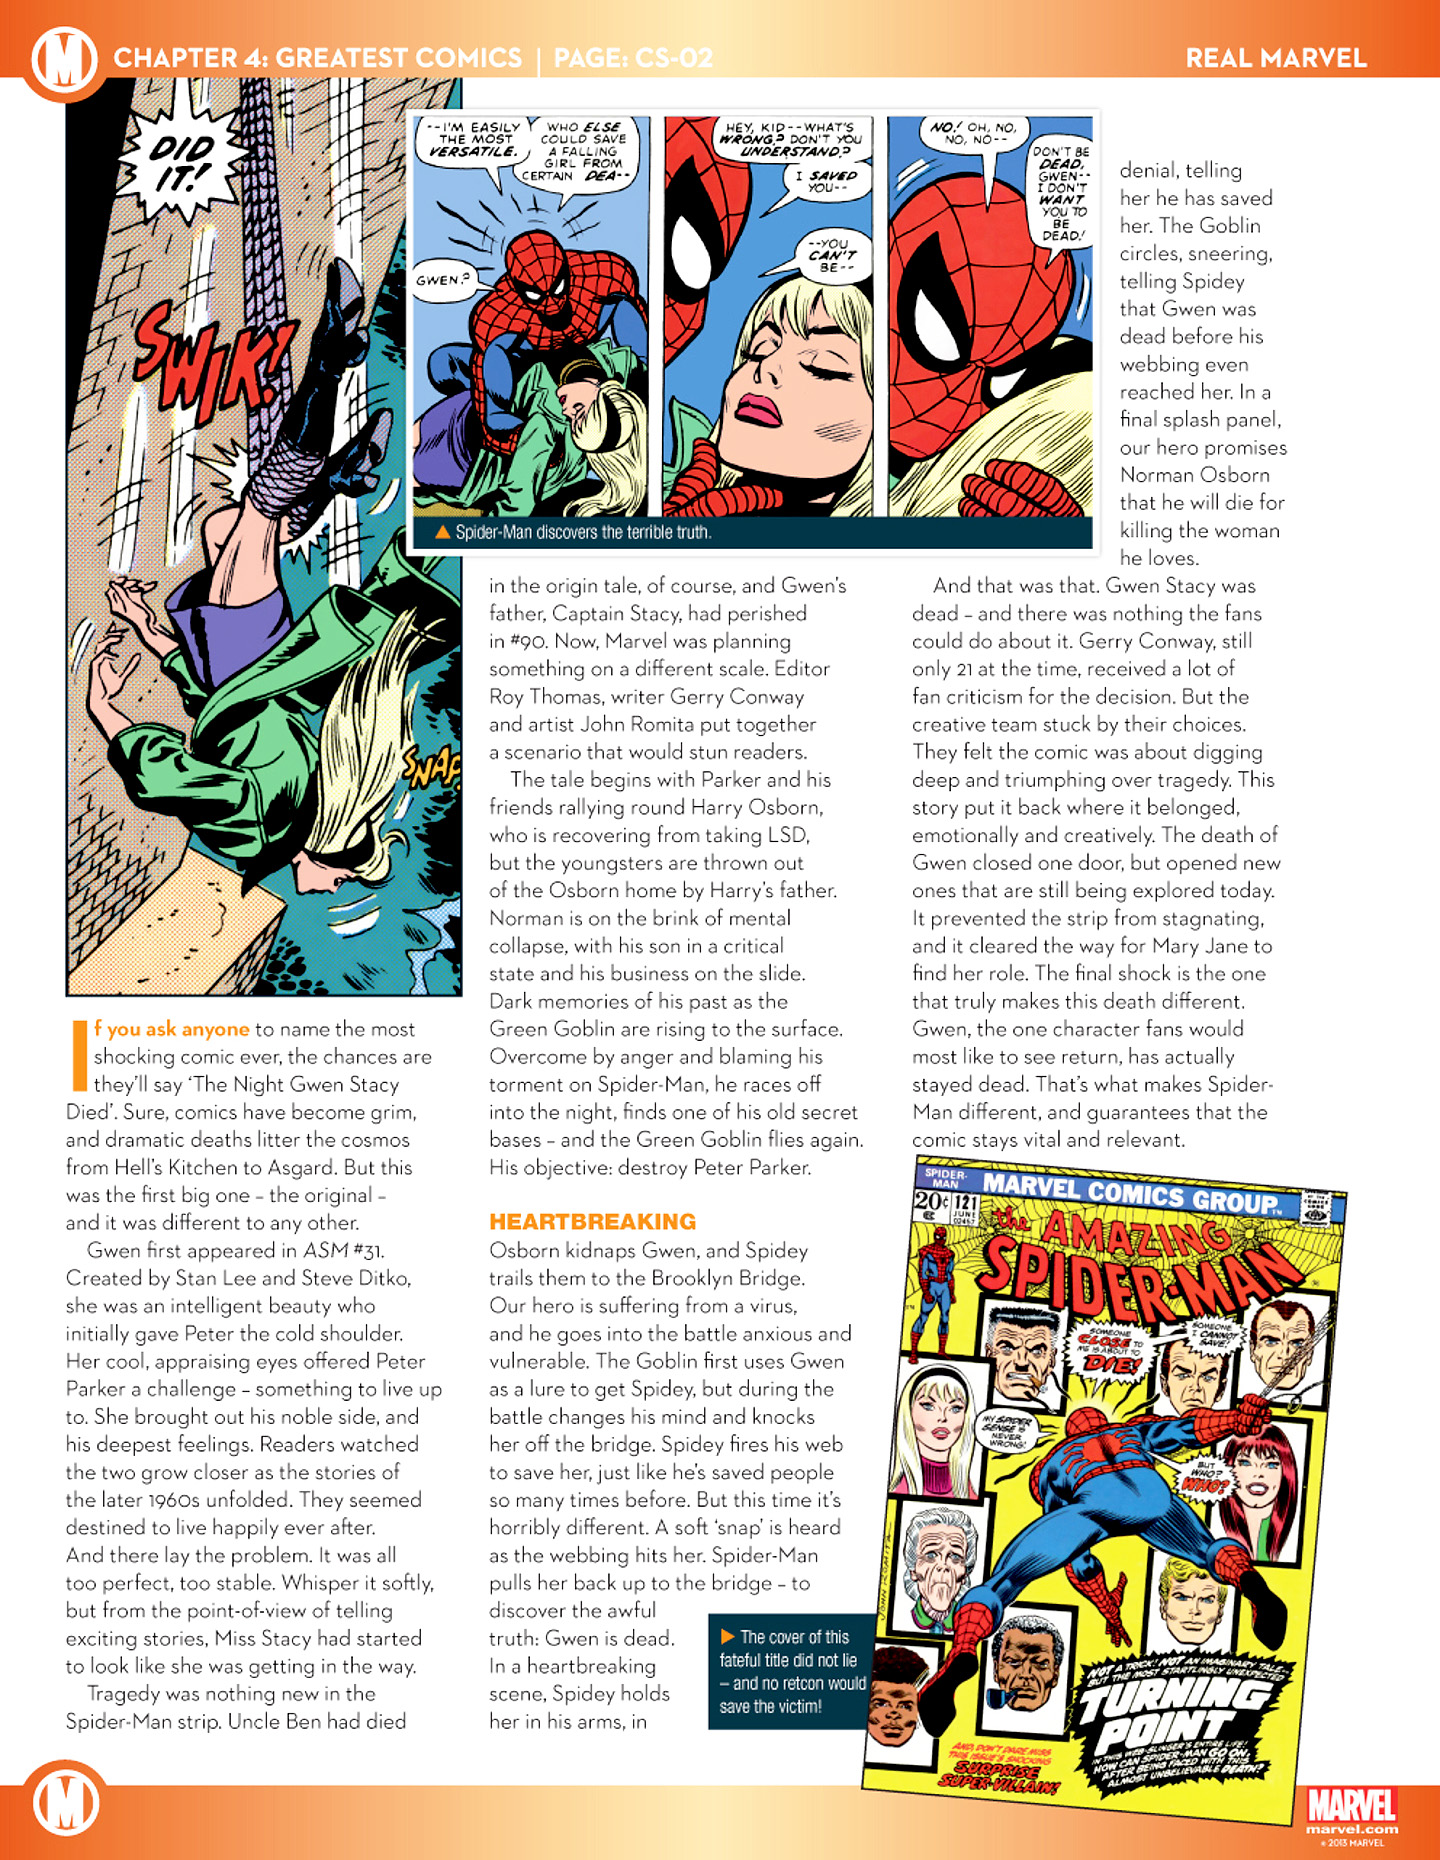 Read online Marvel Fact Files comic -  Issue #22 - 22